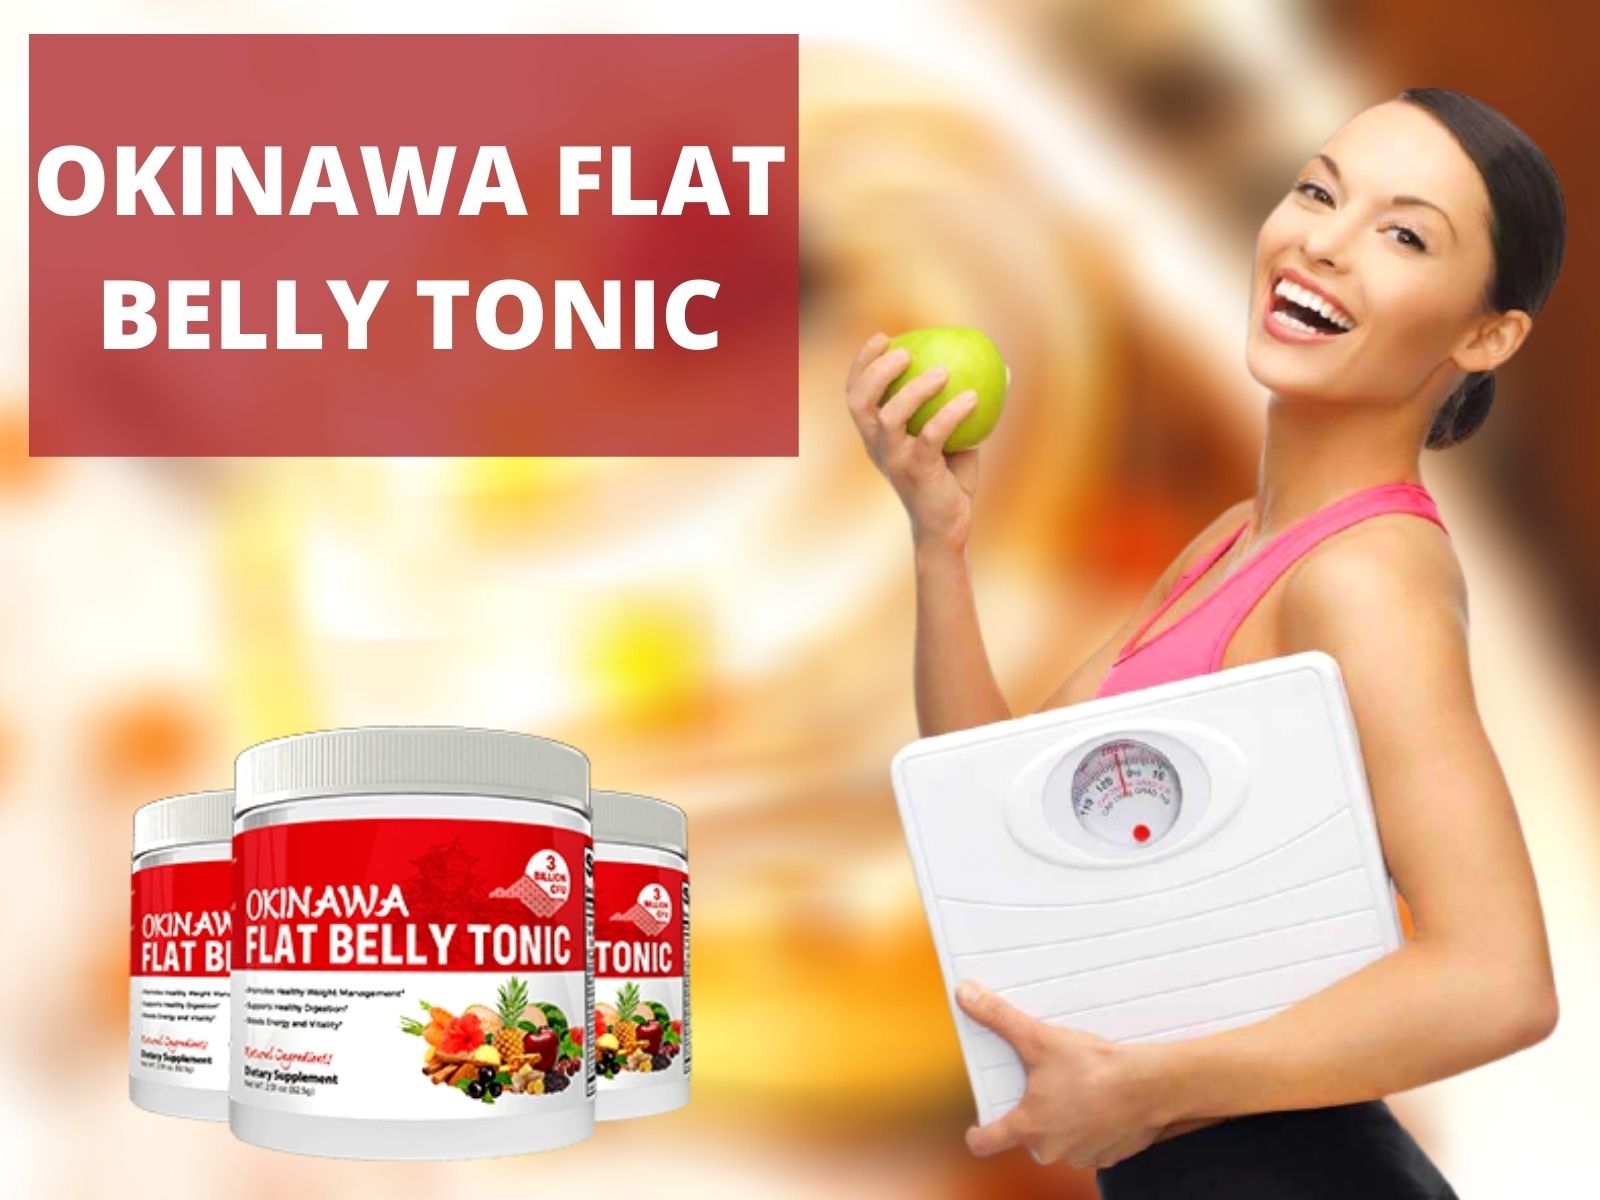 Okinawa Flat Belly Tonic Review by efosa on Dribbble